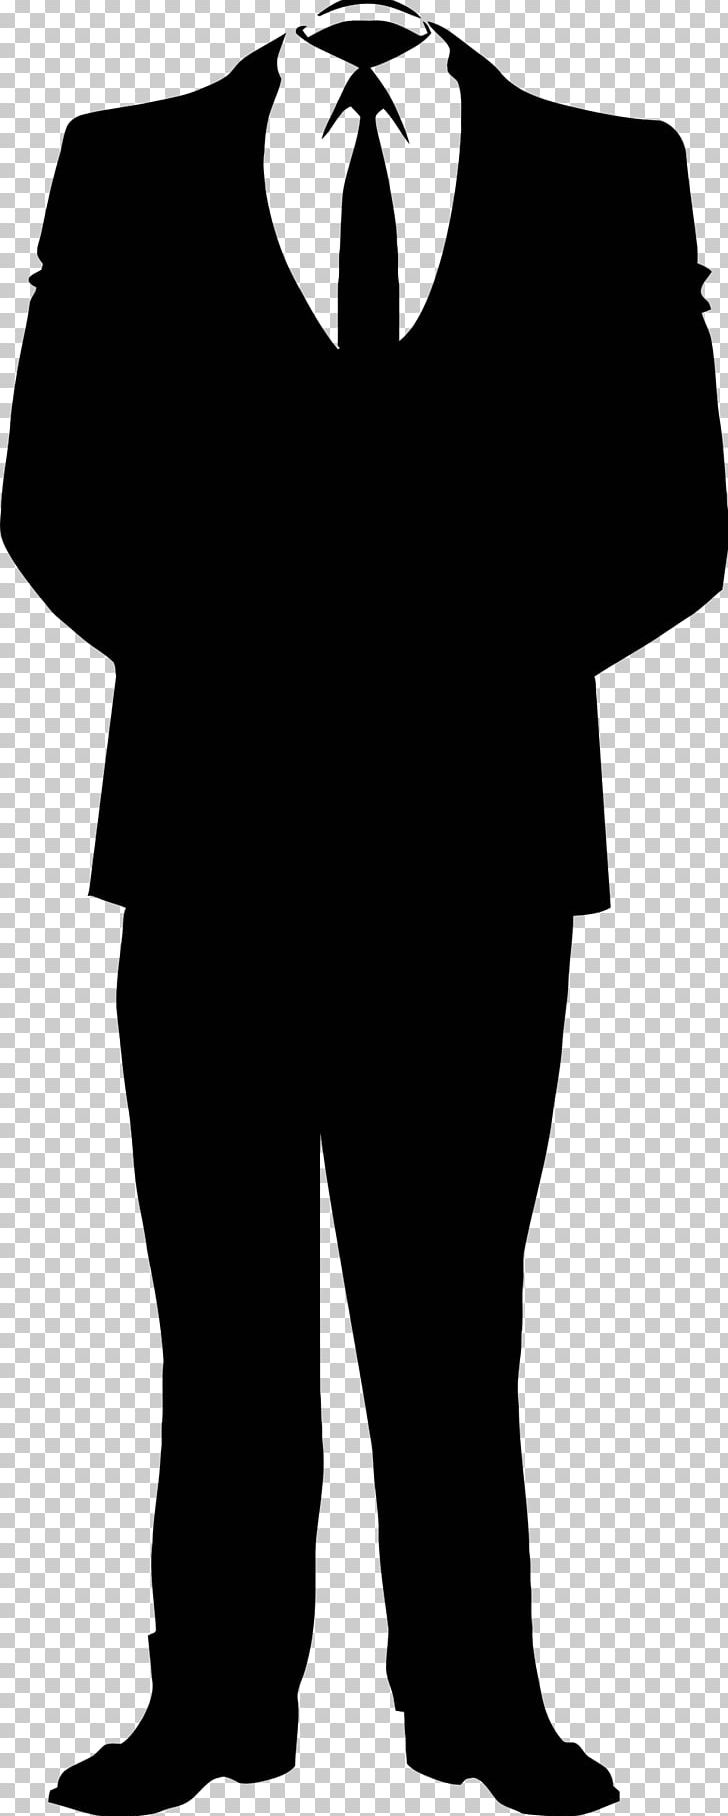 Suit Formal Wear Necktie PNG, Clipart, Anonymous Person, Black, Black And White, Clothing, Coat Free PNG Download